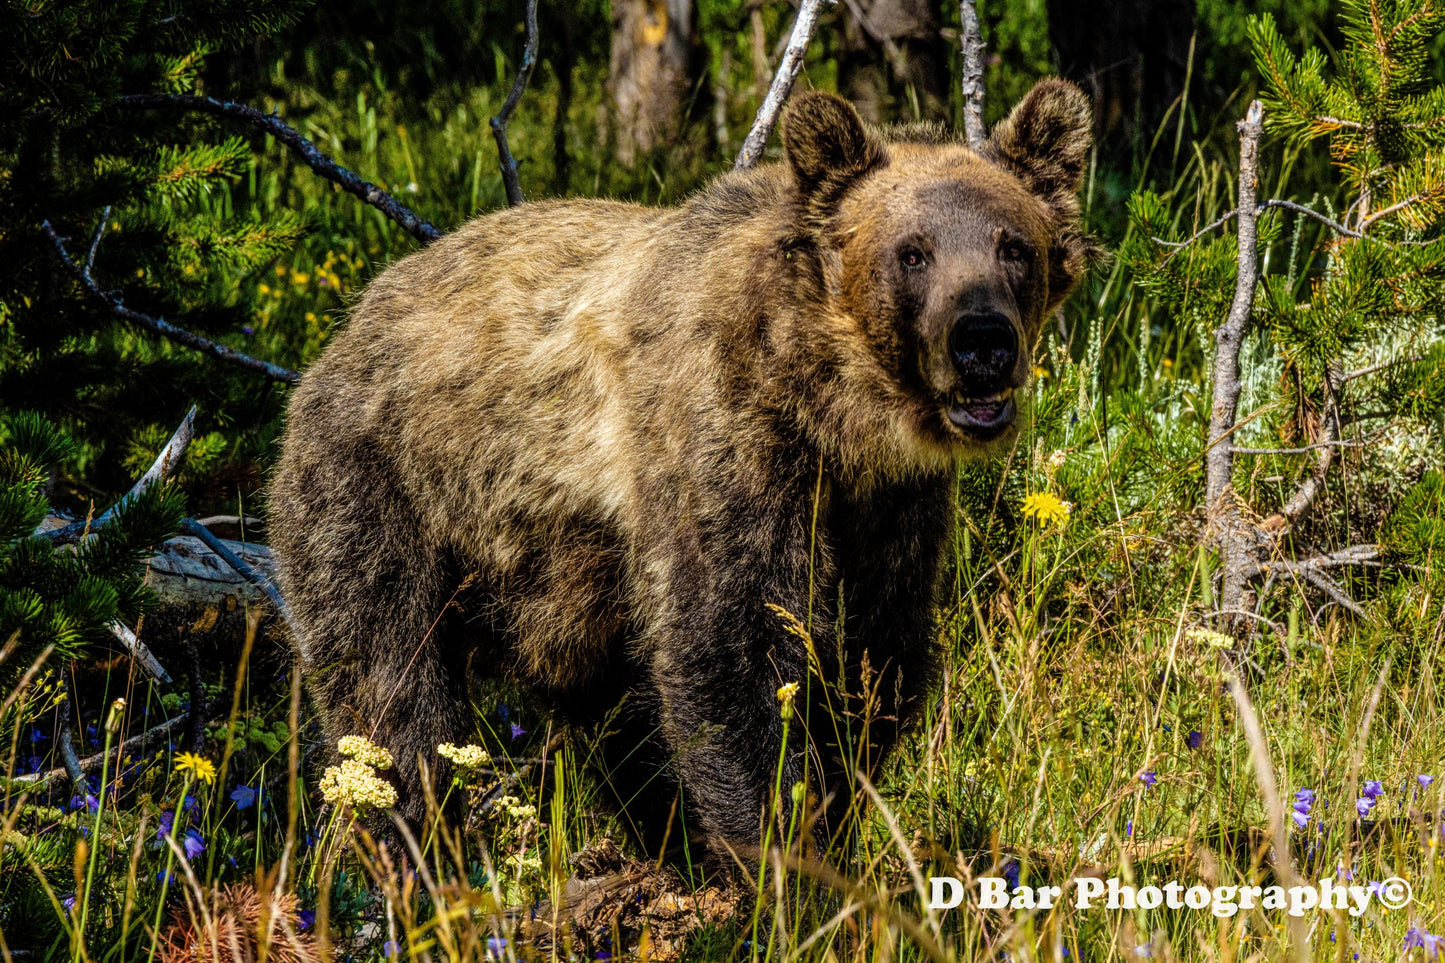 Yellowstone Grizzly Bear